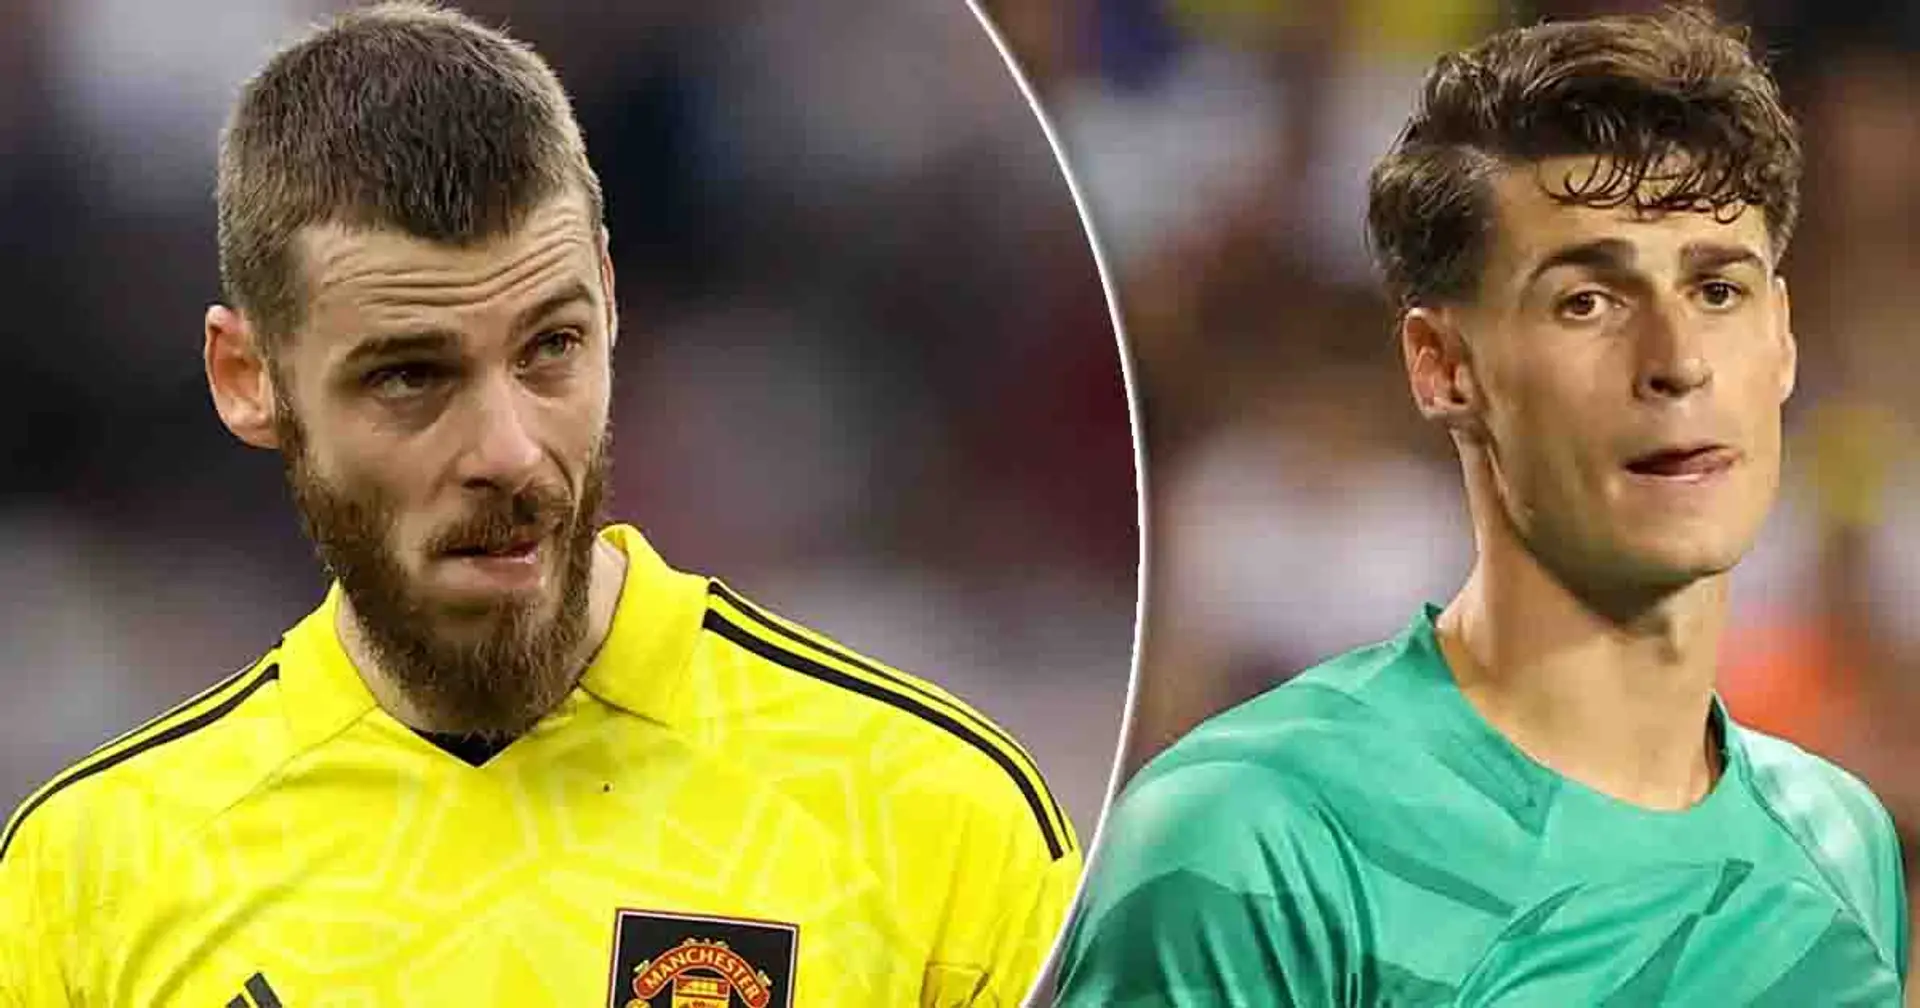 David de Gea linked with another European heavyweight after failing to get Real Madrid move (reliability: 4 stars)